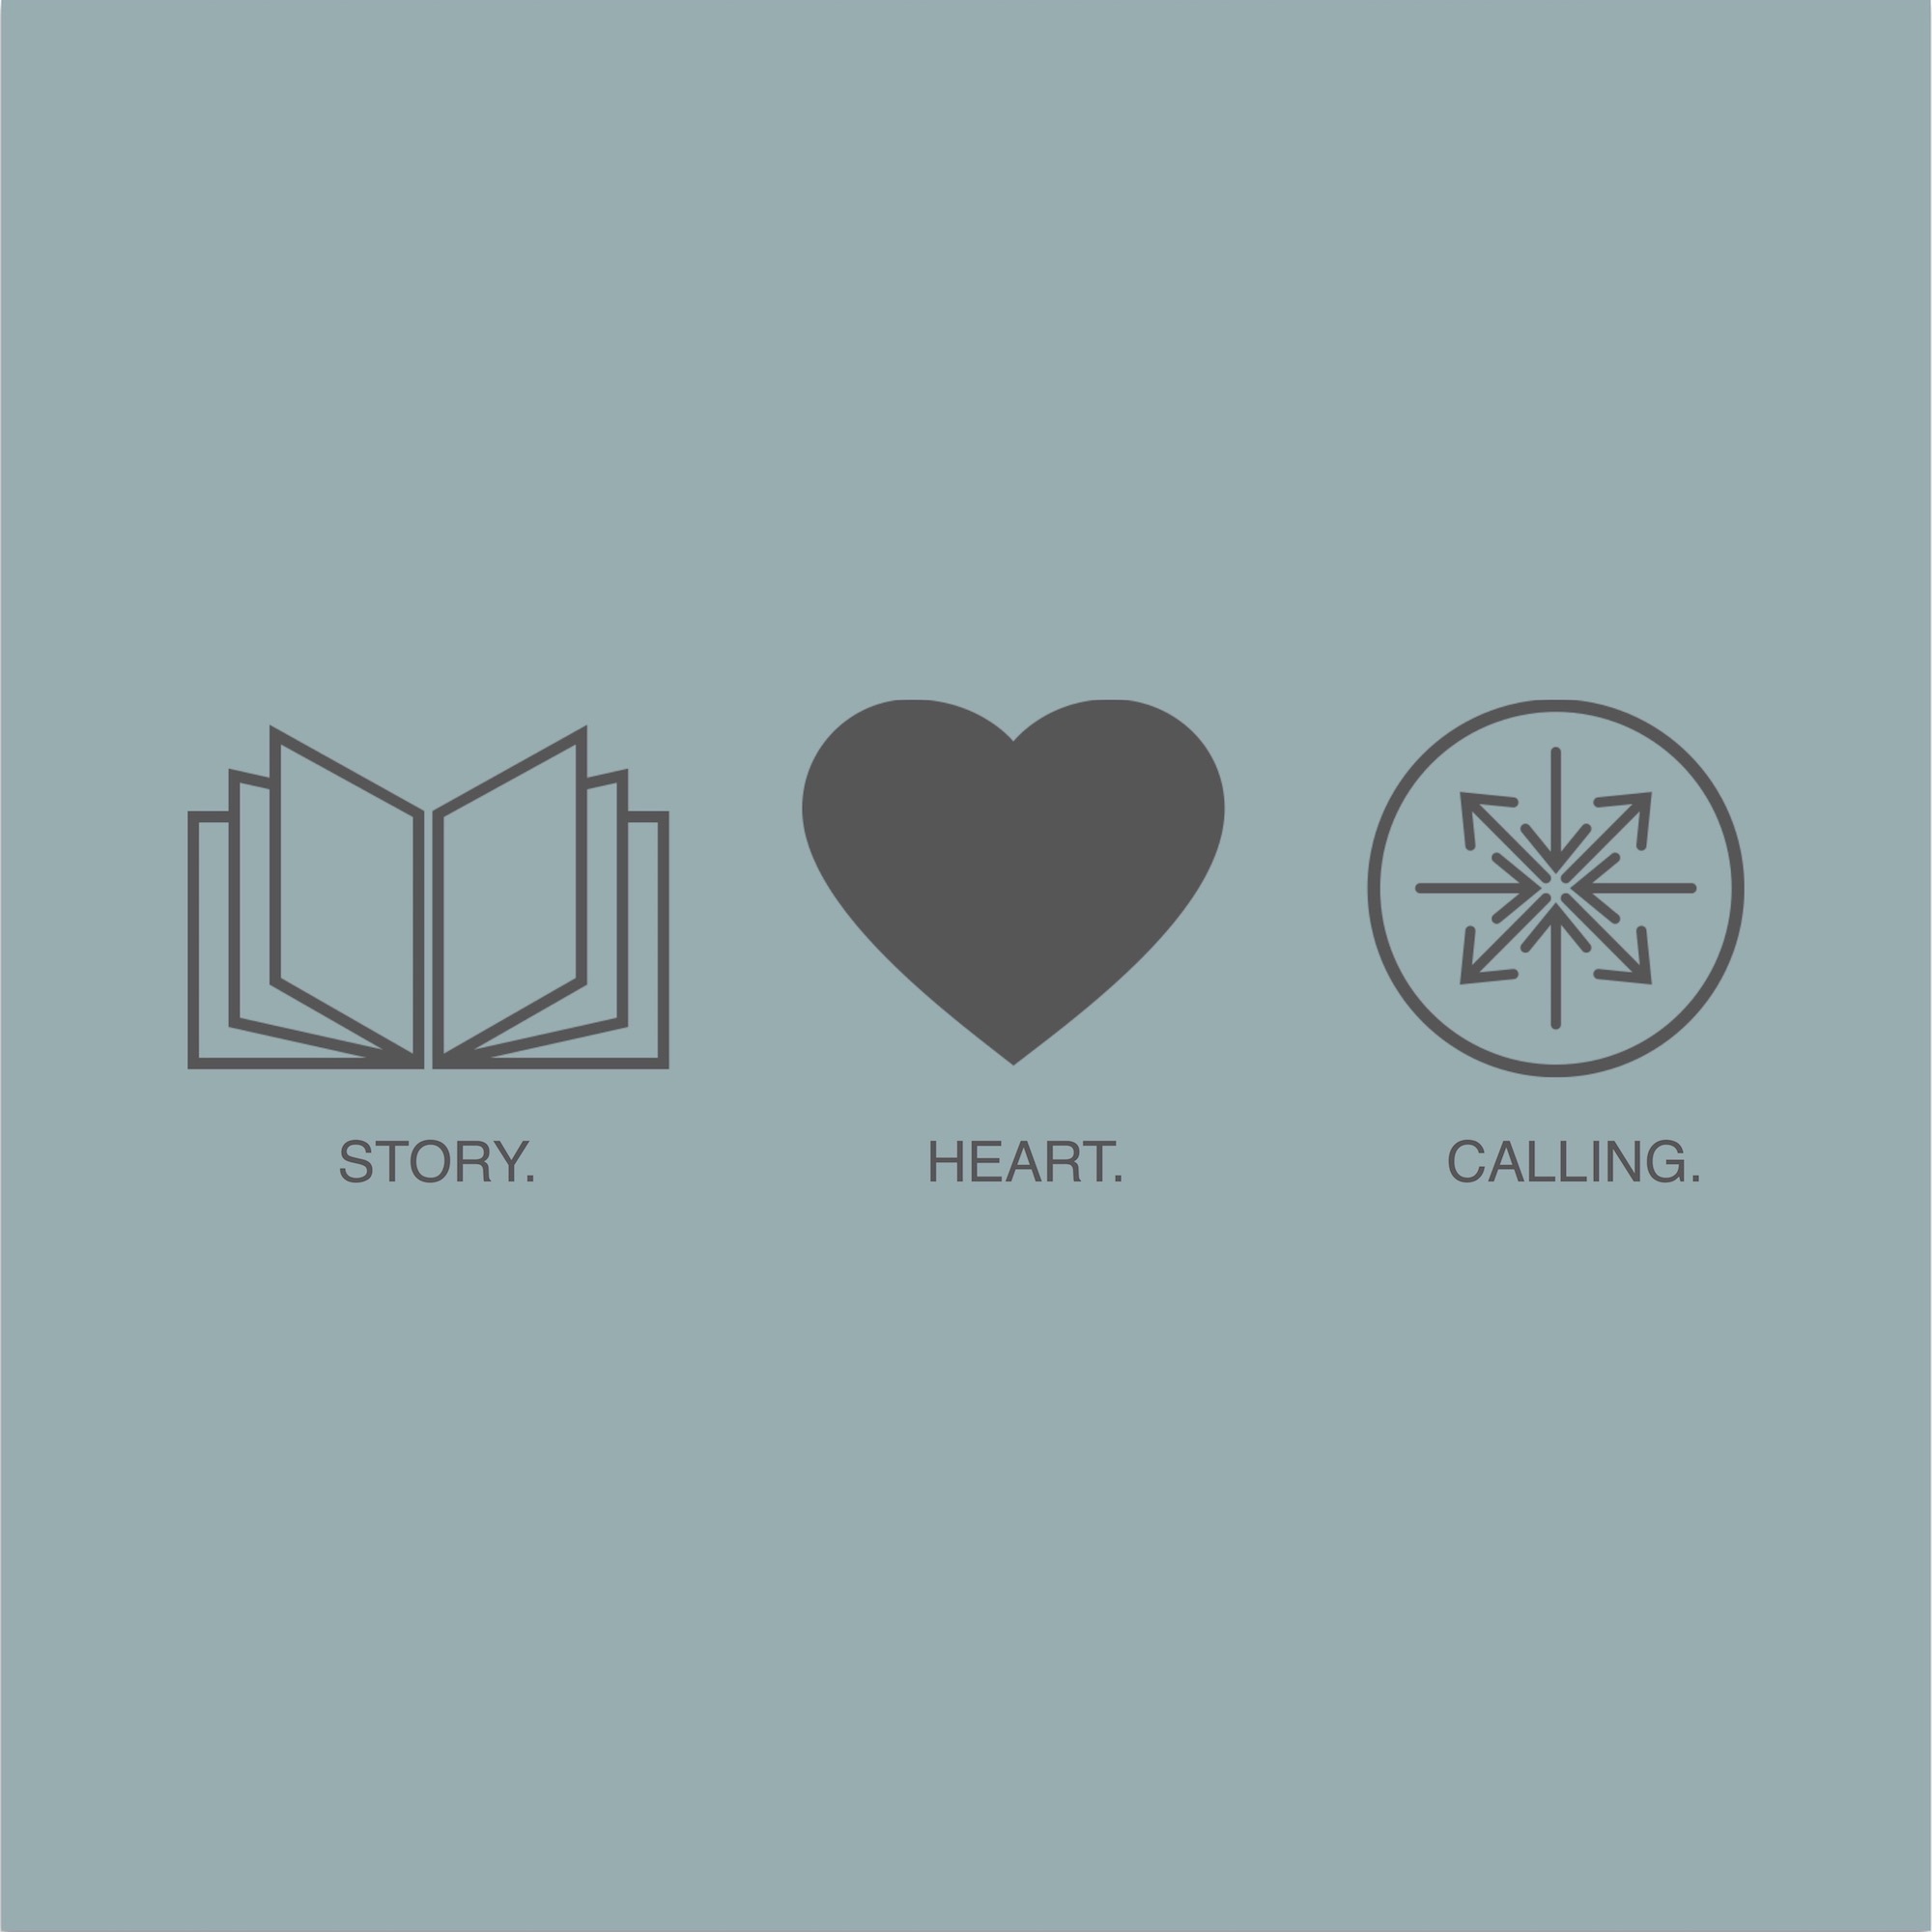 Image of an open book, a heart, and a compass